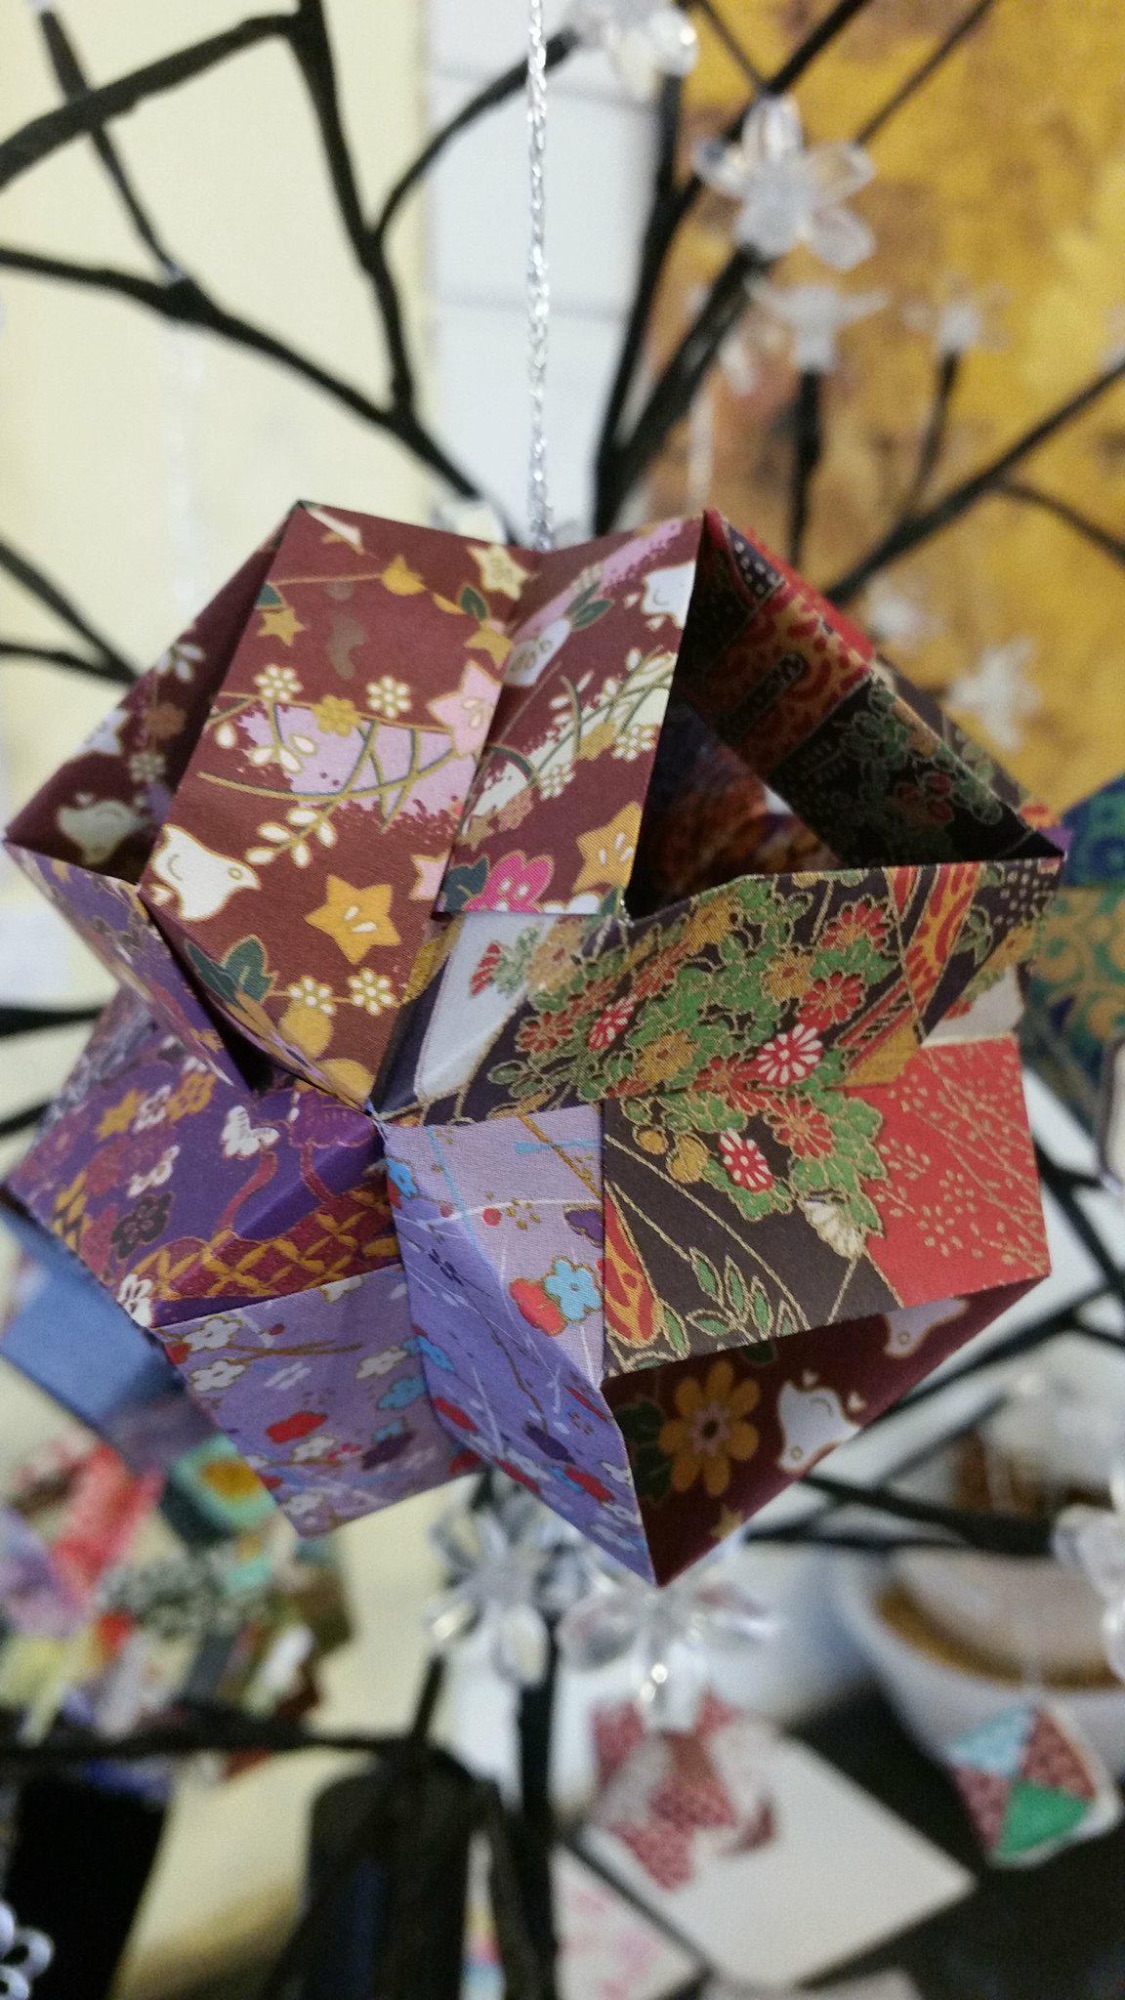 origami at The Craft Studio in Pewsey